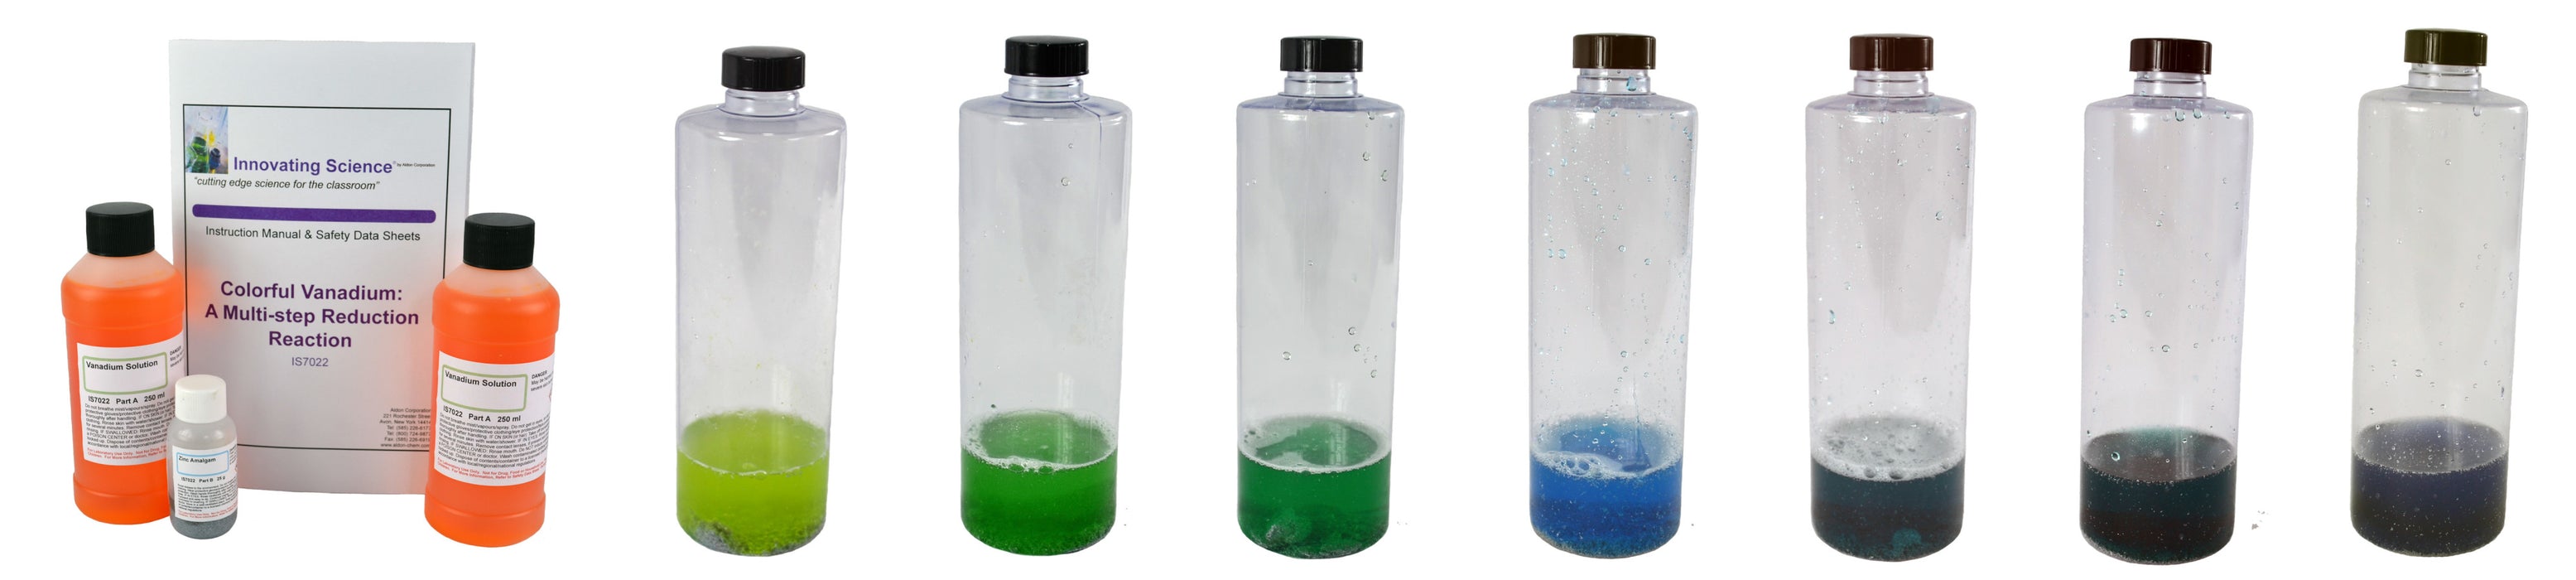 Innovating Science Colorful Vanadium - A Multi-step Reduction Reaction Chem. Demo